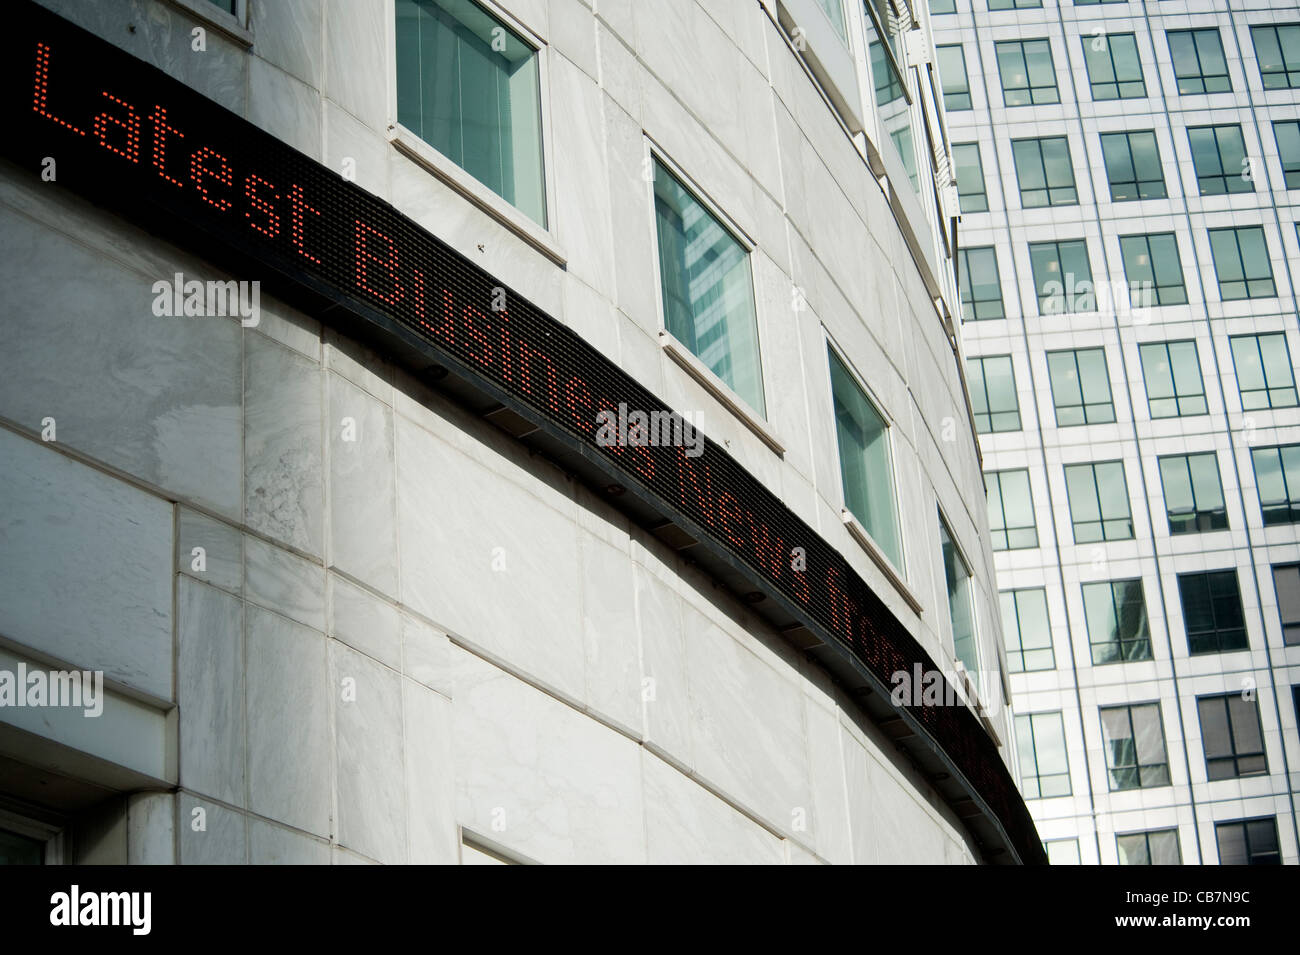 Lateste business news from Reuters in the city, ticker Stock Photo